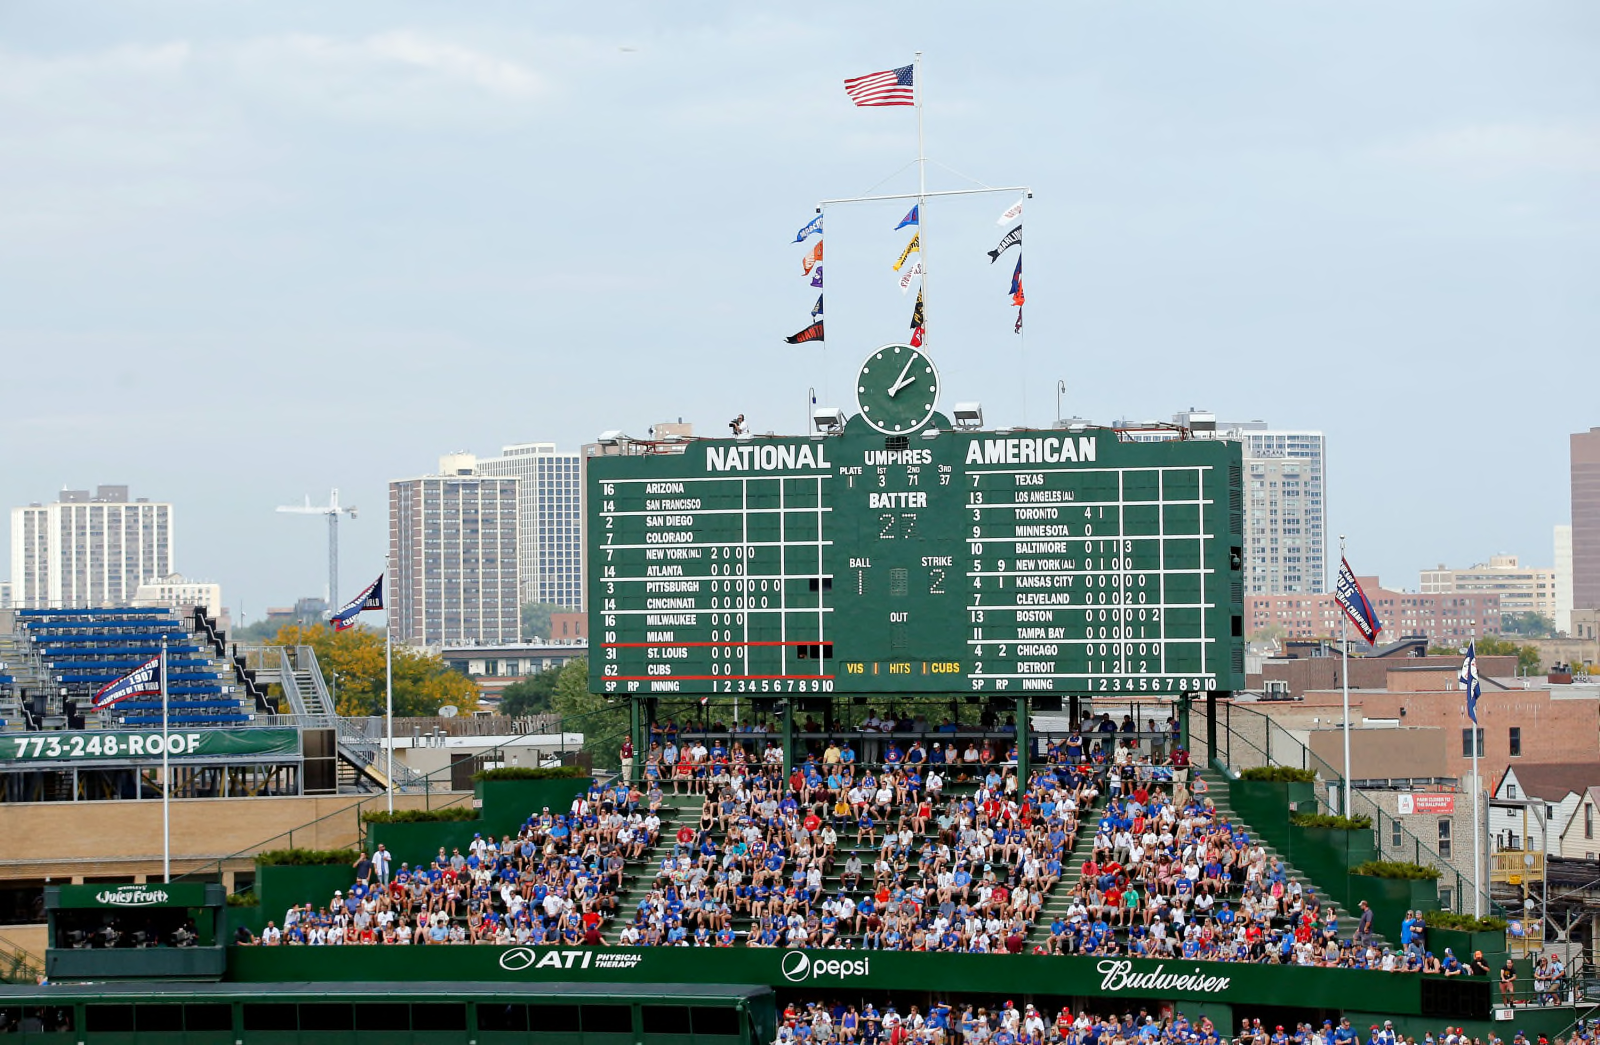 Column: Chicago Cubs opening day melds past with future